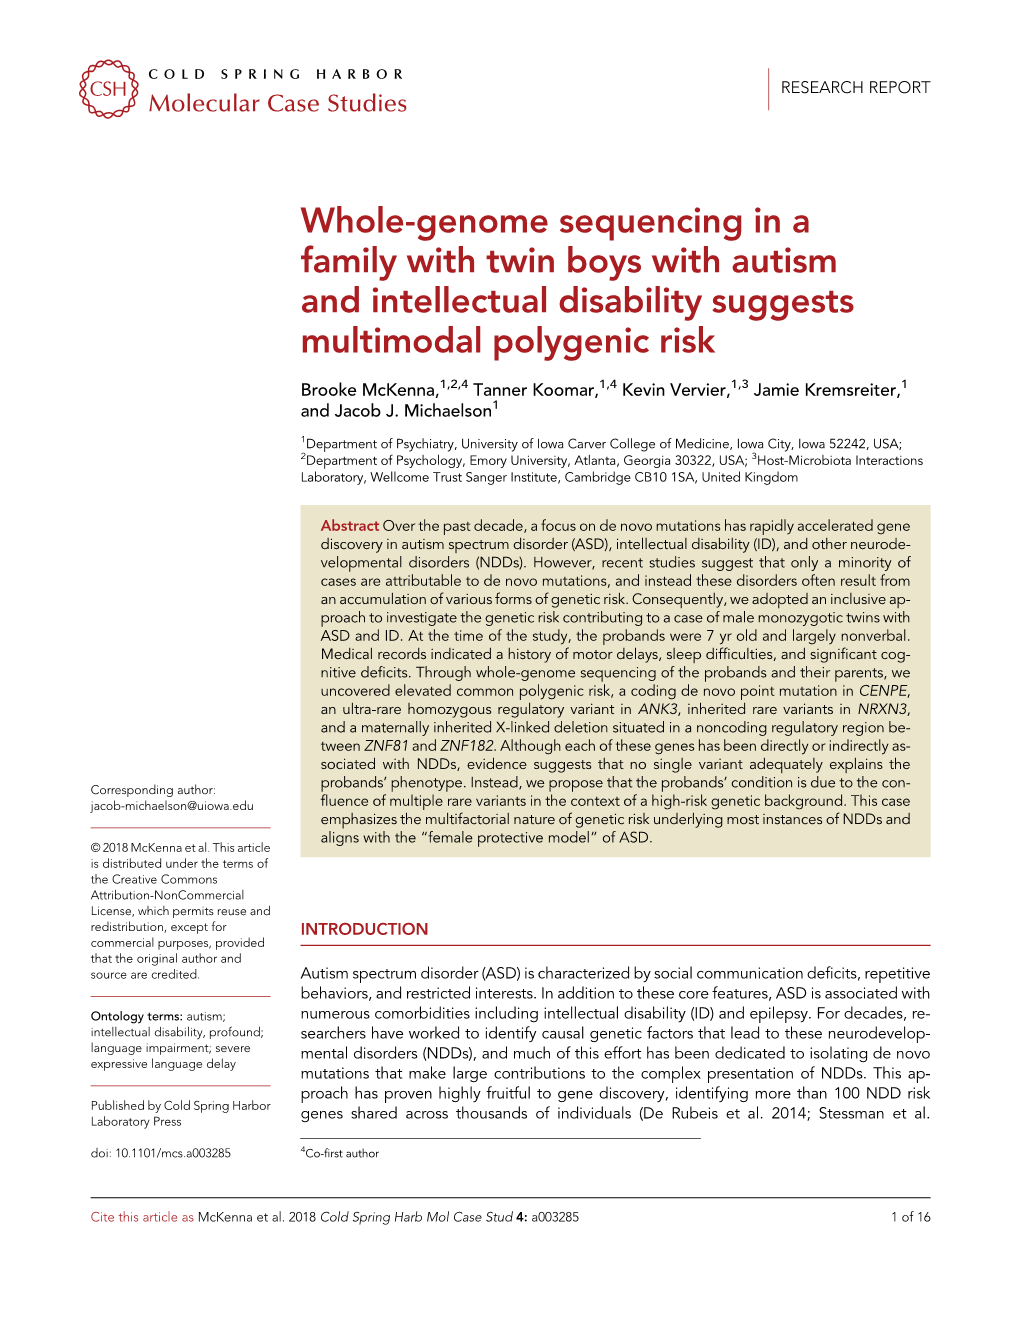 Whole-Genome Sequencing in a Family with Twin Boys with Autism and Intellectual Disability Suggests Multimodal Polygenic Risk